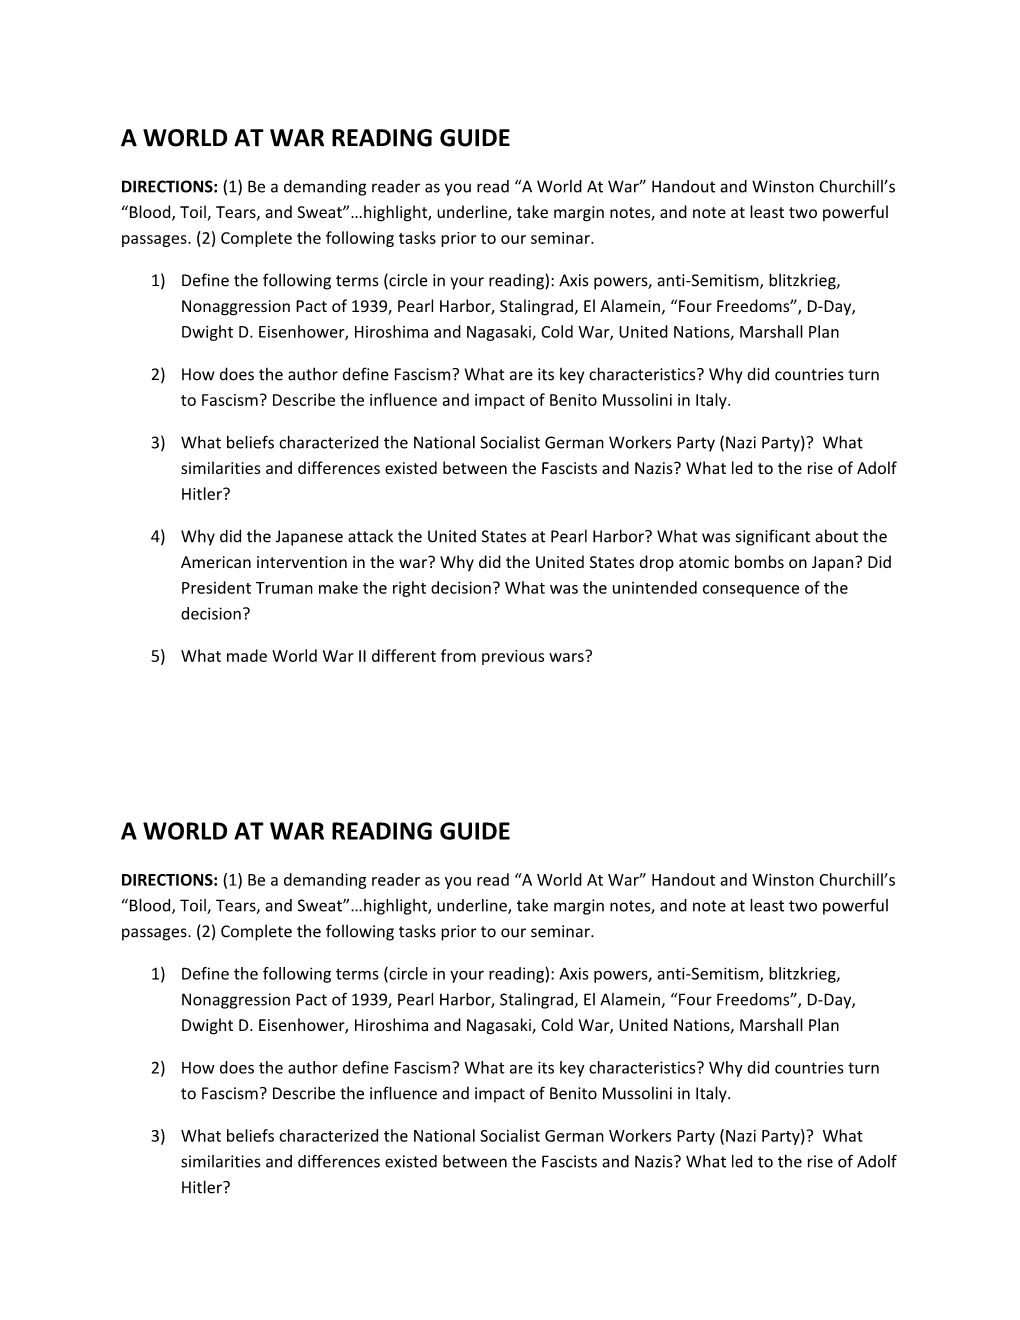 A World at War Reading Guide